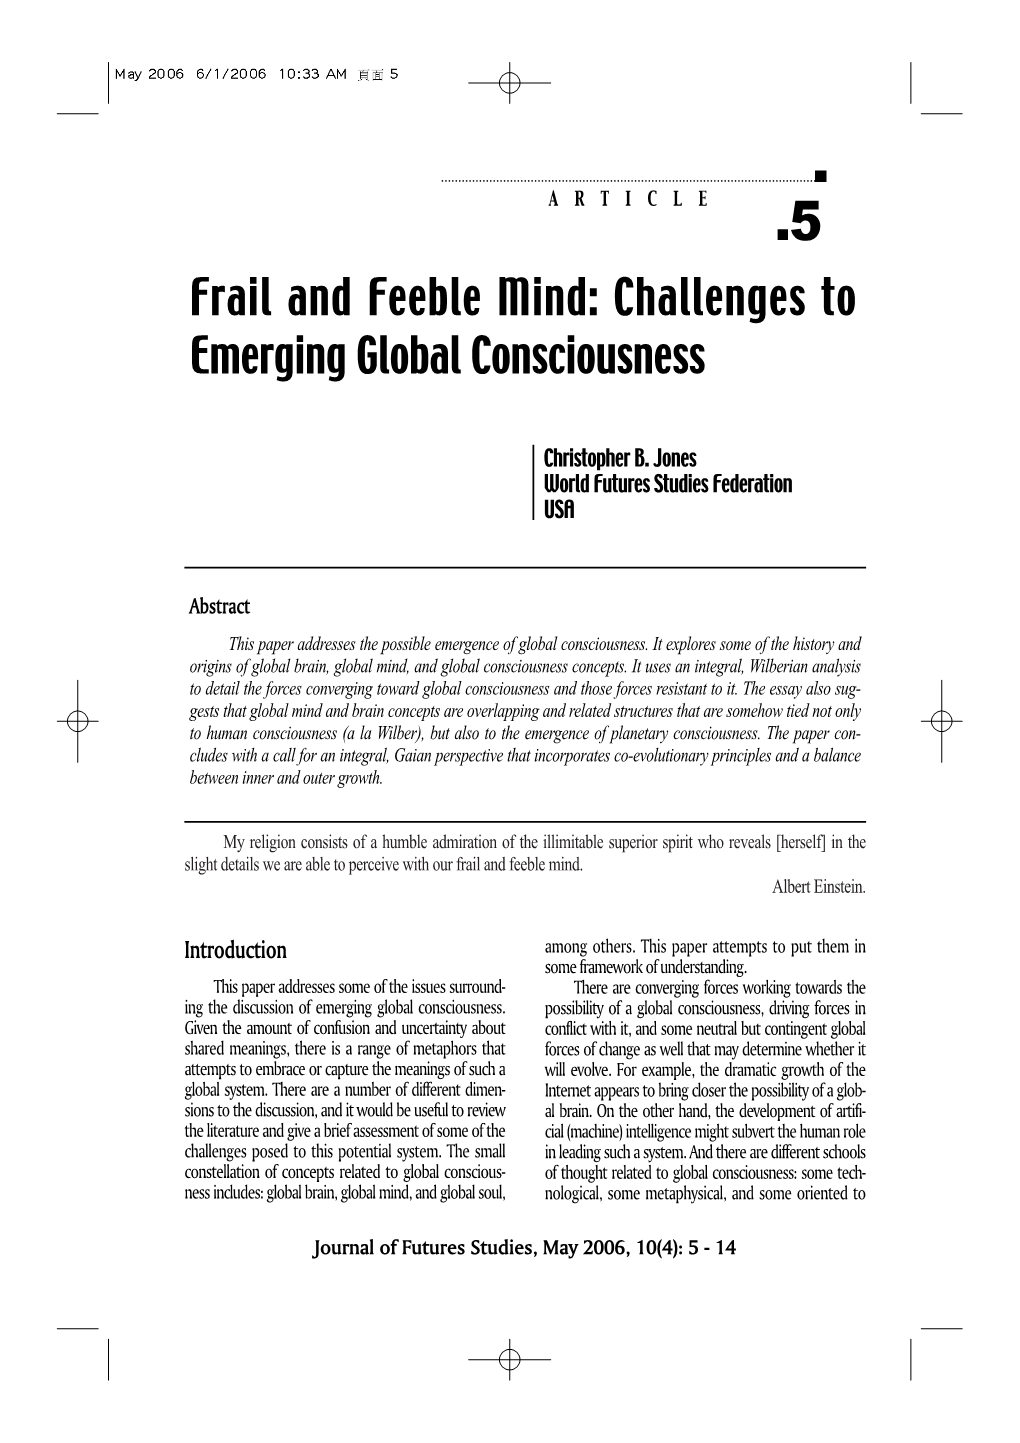 Frail and Feeble Mind: Challenges to Emerging Global Consciousness